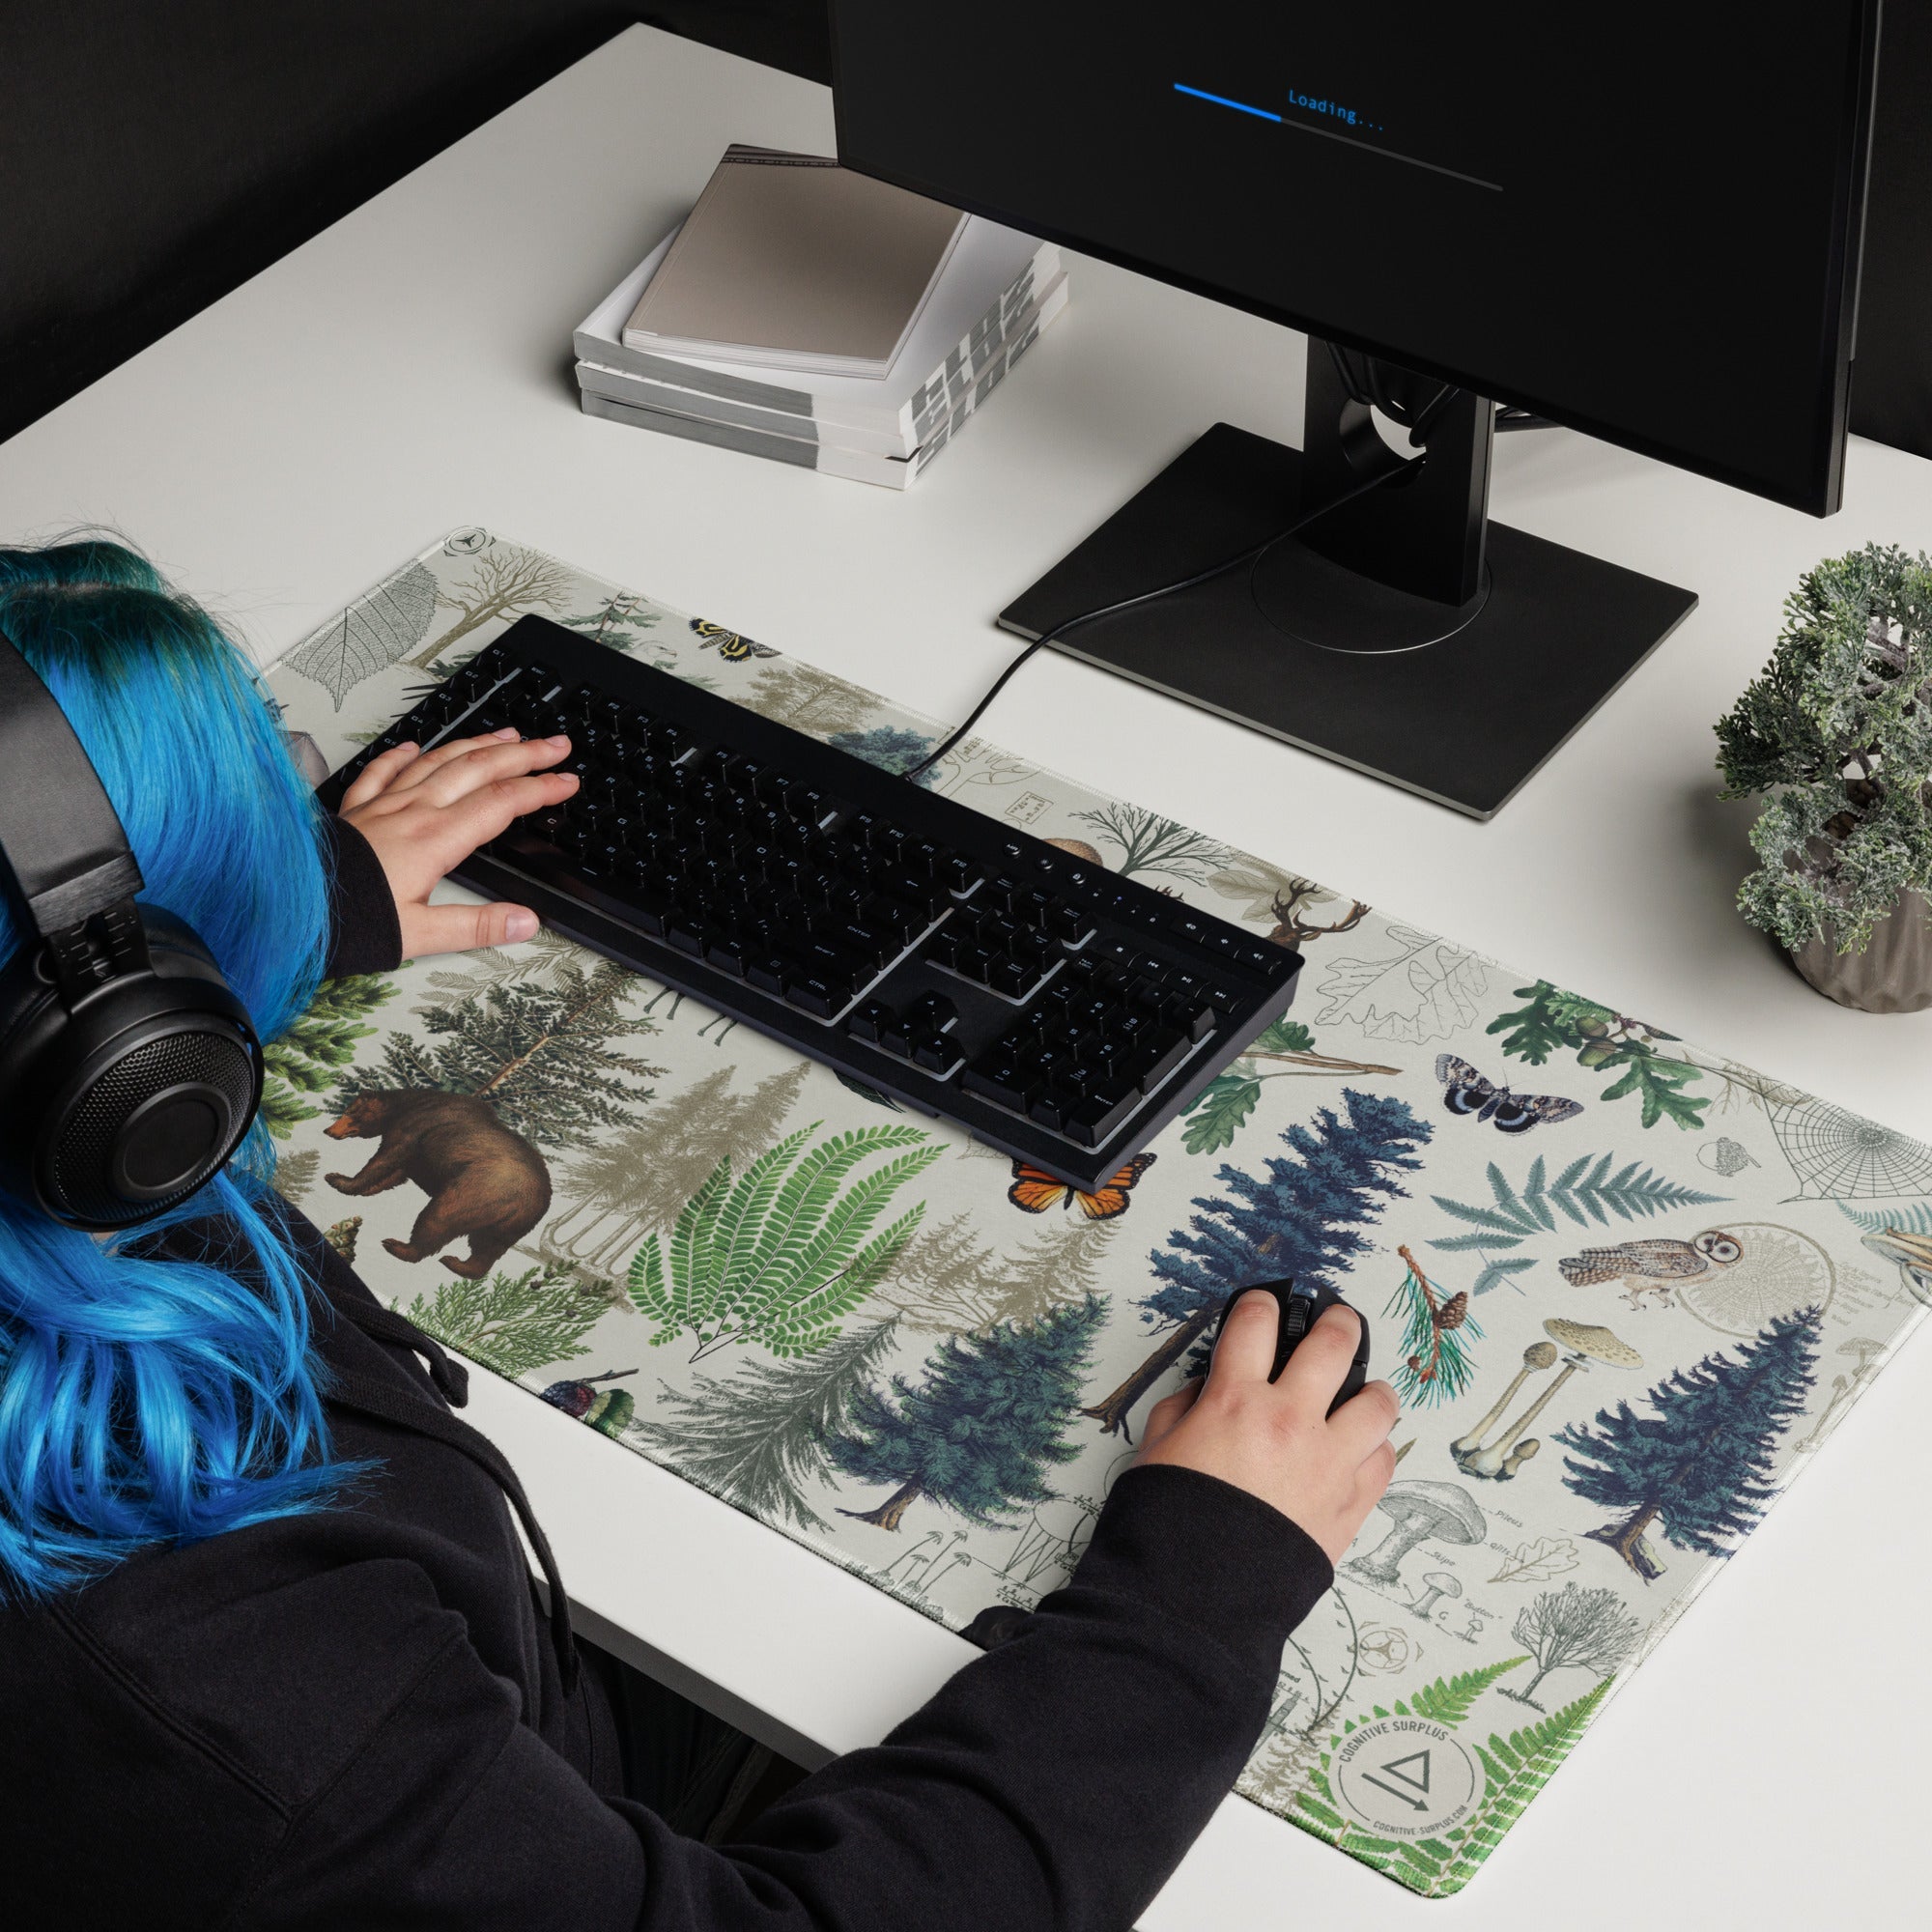 Woodland Forest Gaming Mouse Pad